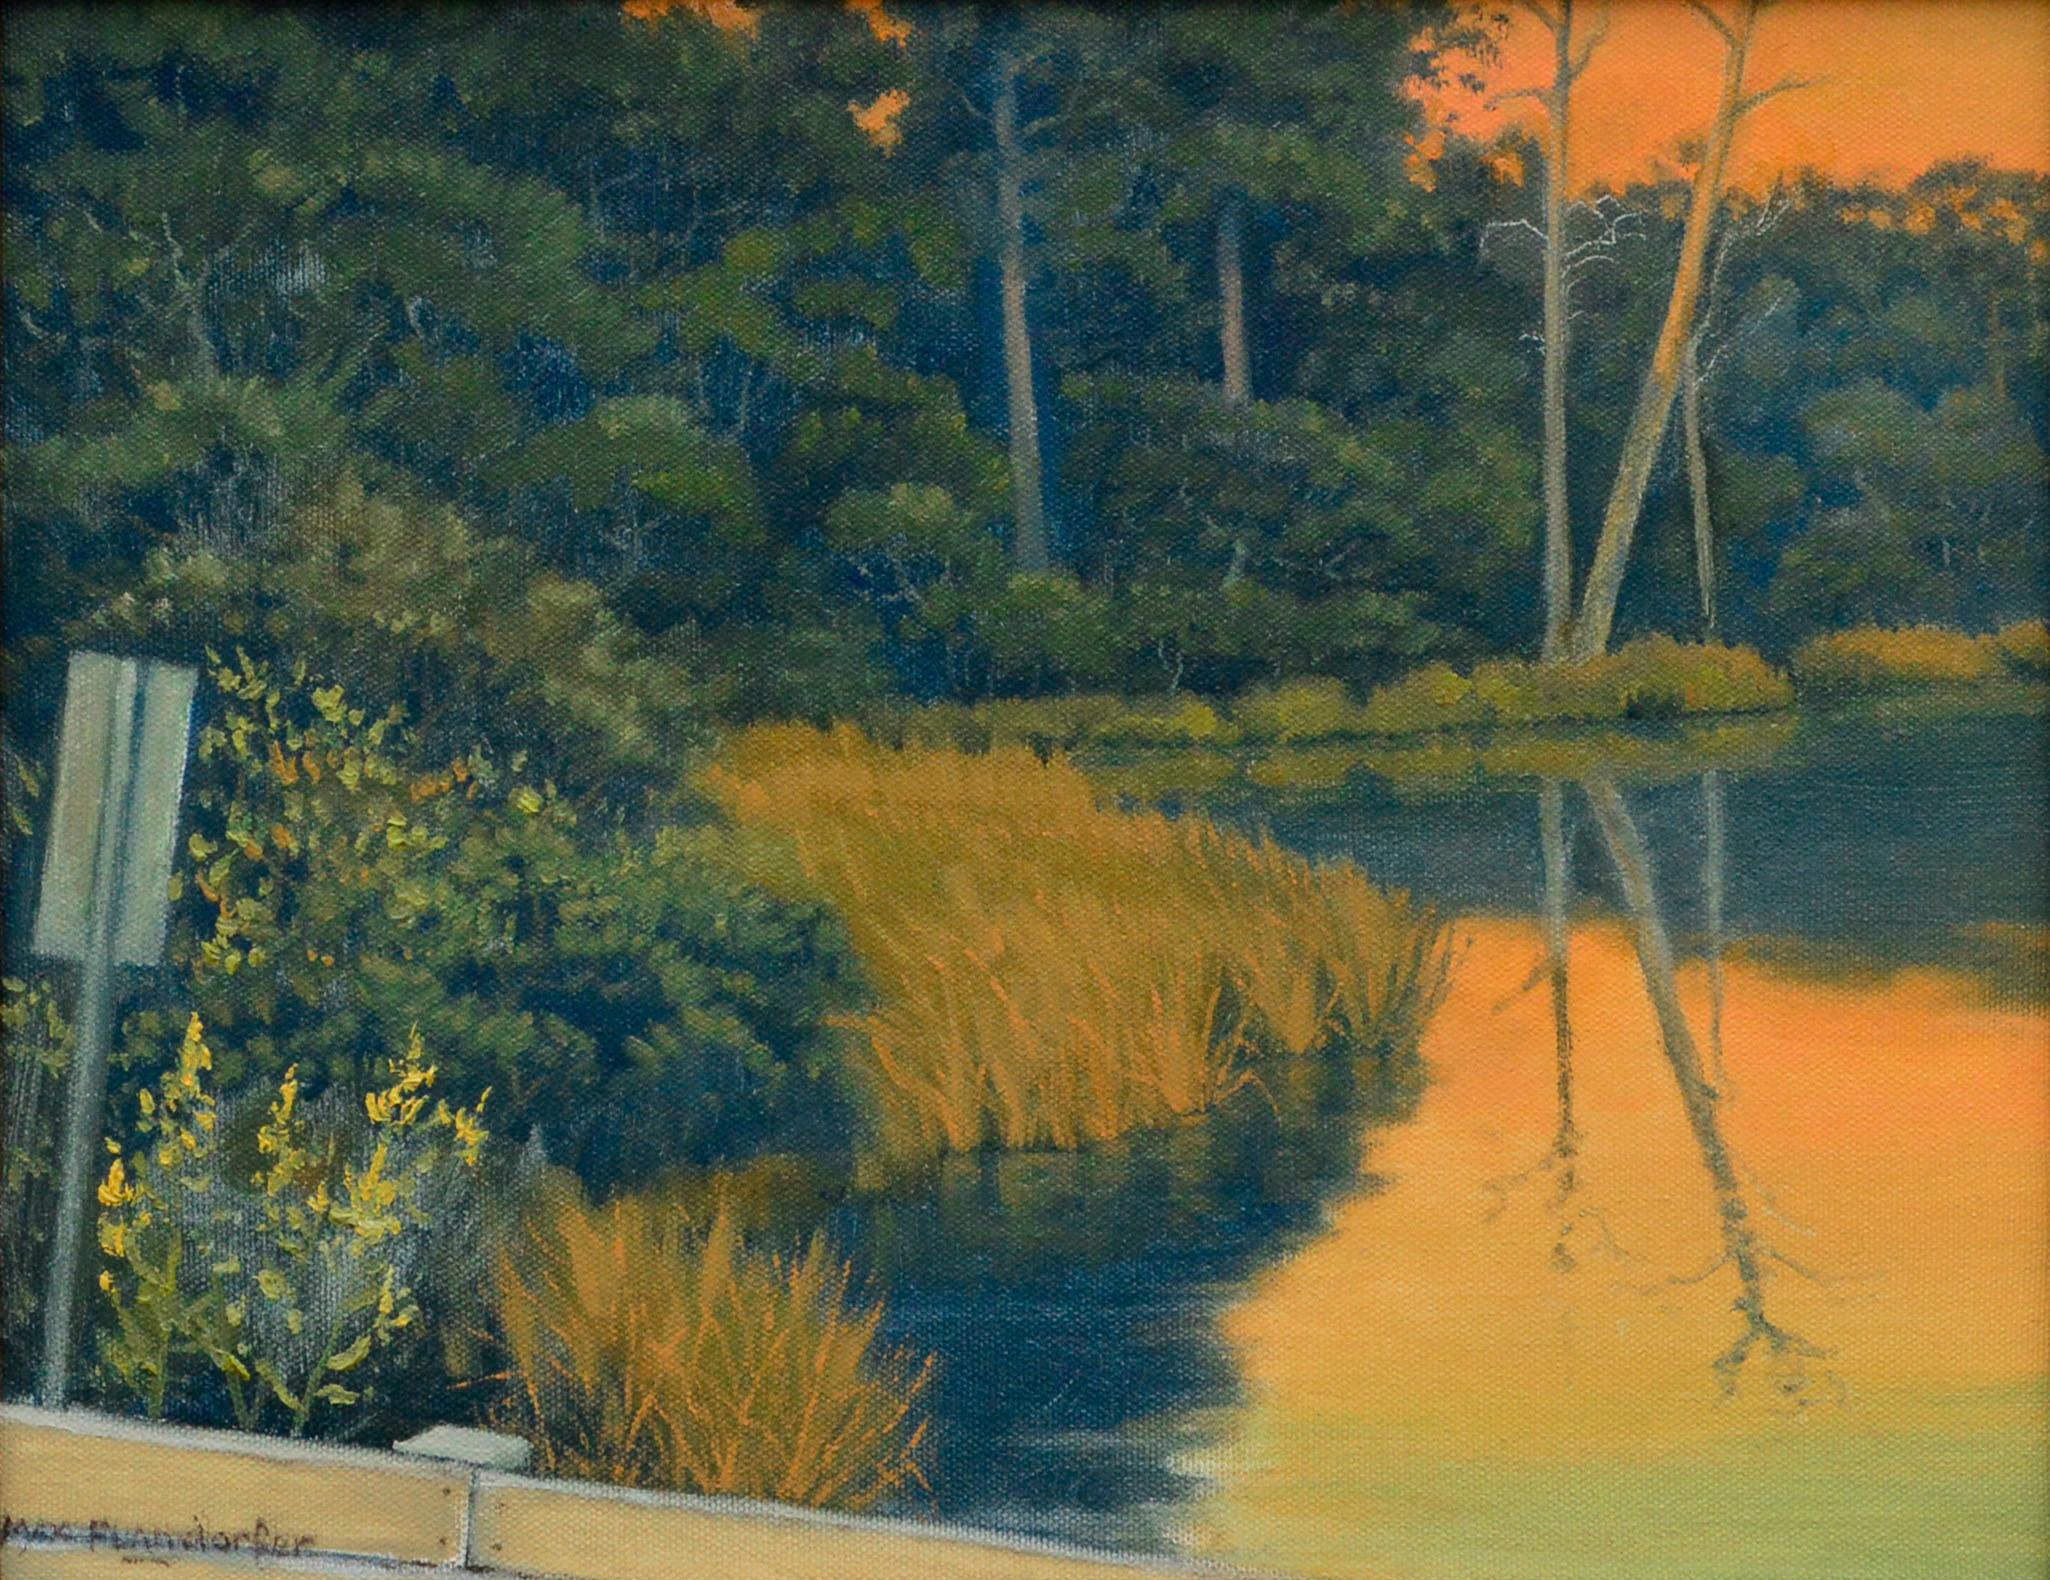 Quiet Pond at Sunset - California Golden Hour Landscape  - Painting by Max Flandorfer